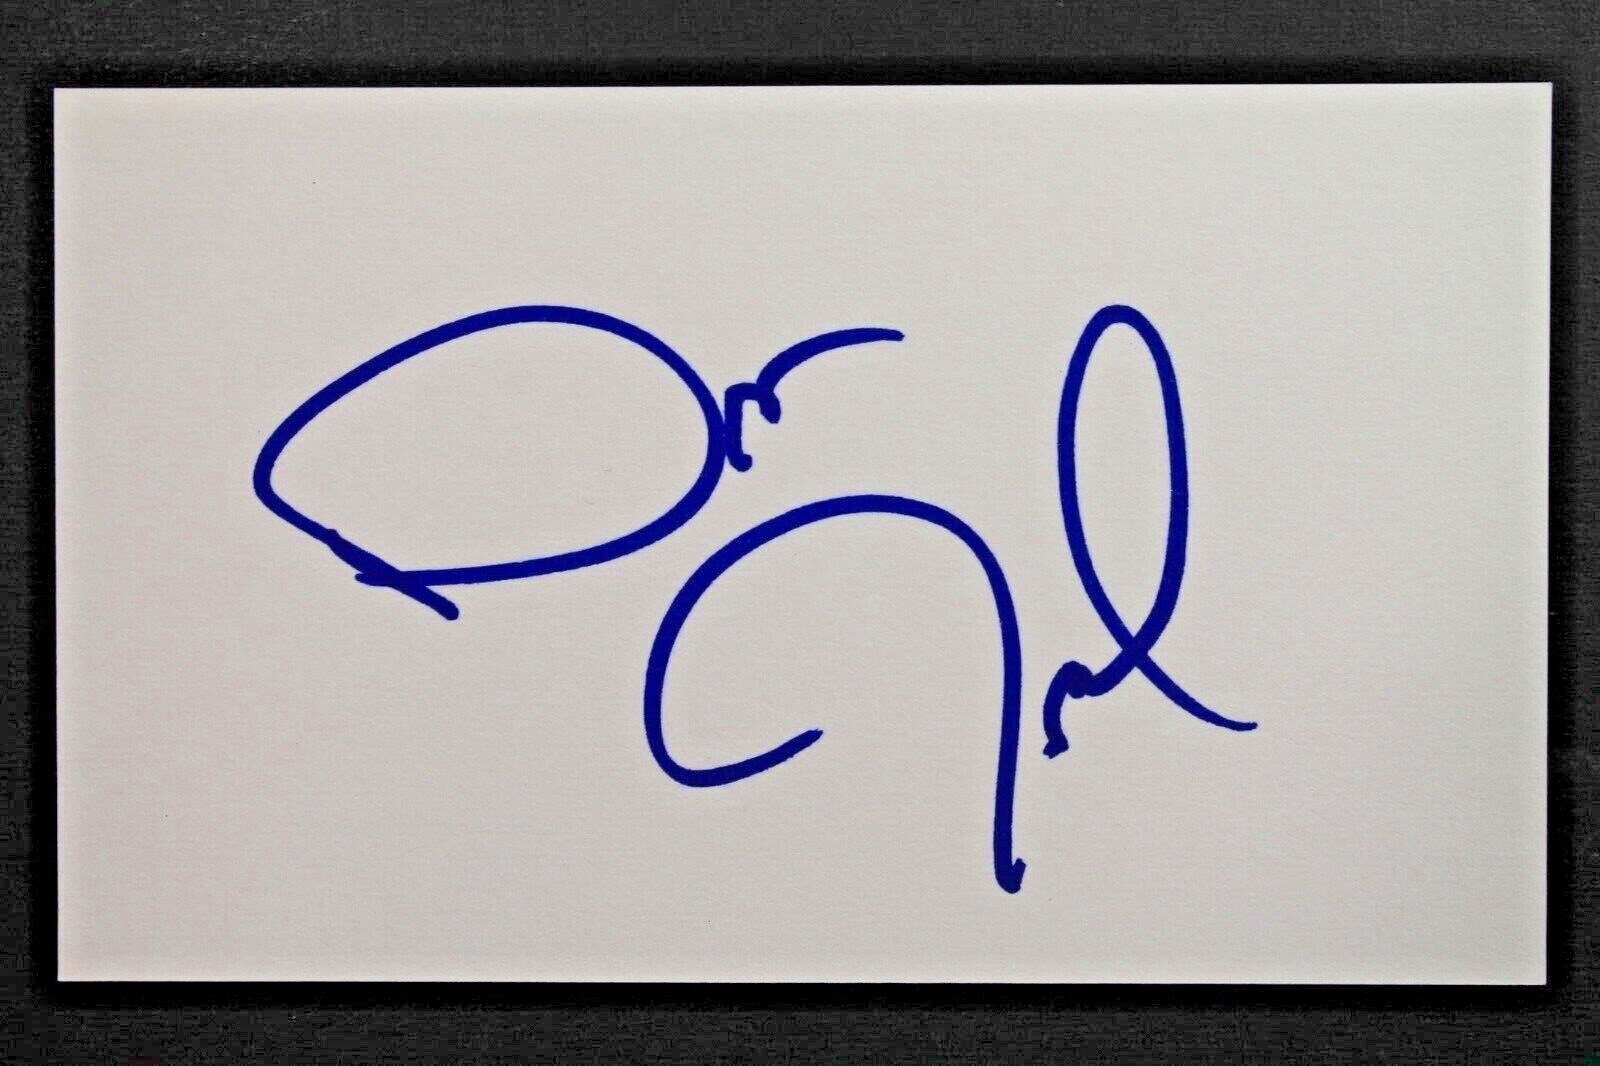 Dan Issel Kentucky Nuggets Hof Autographed Signed 3x5 Basketball Index Card